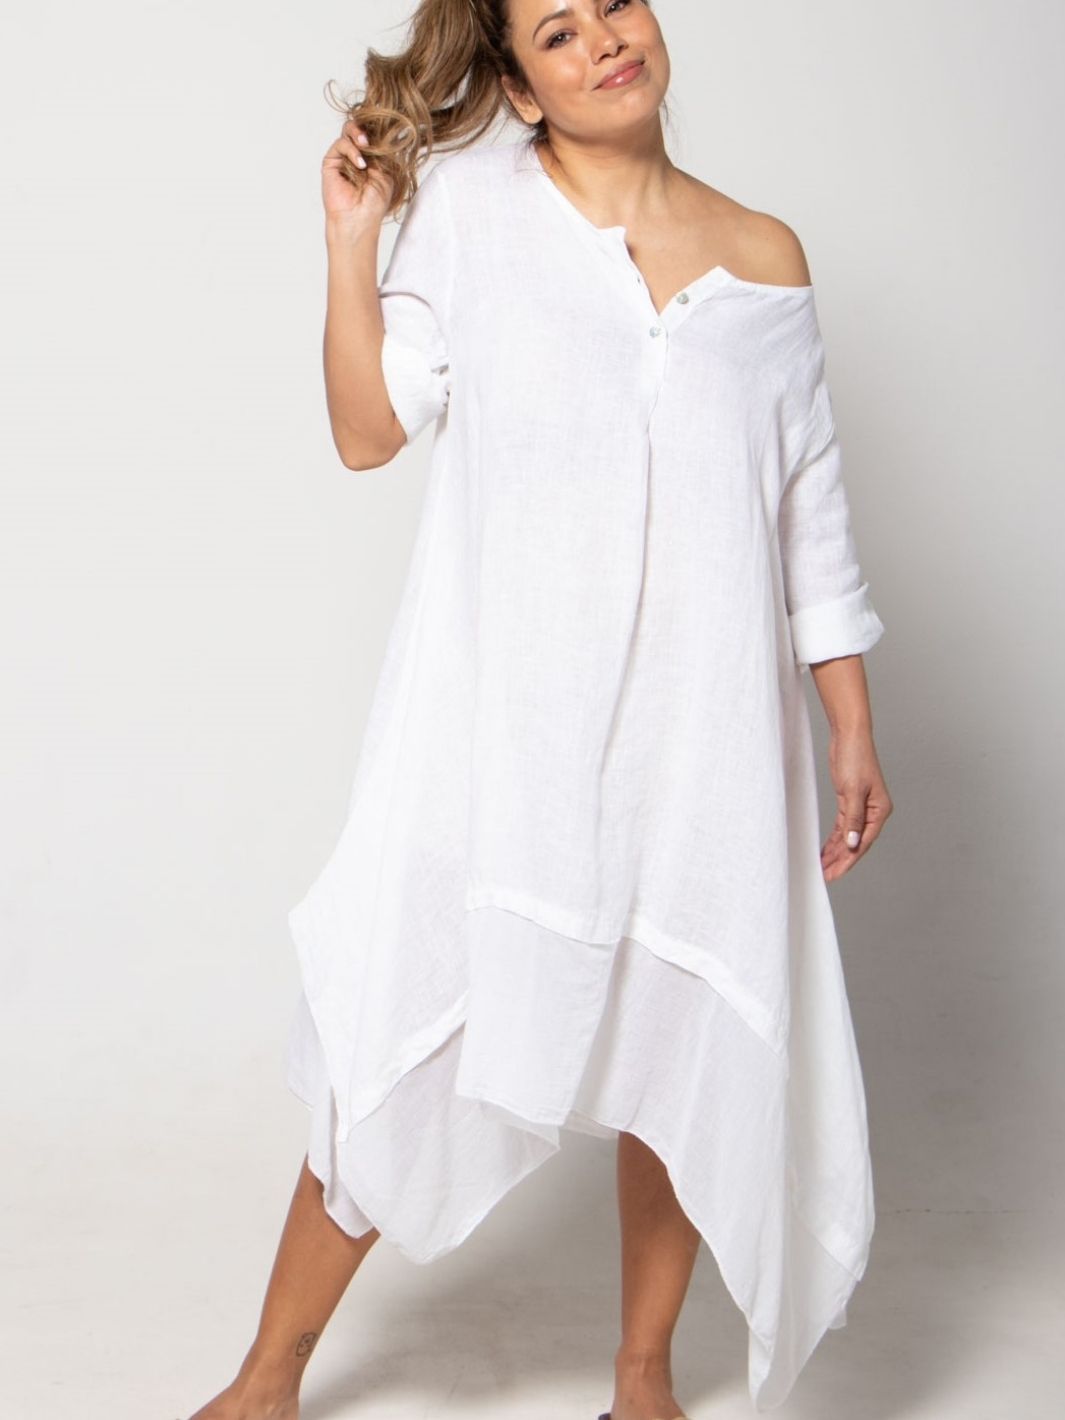 Buttoned Linen Dress With Sleeves - Olive